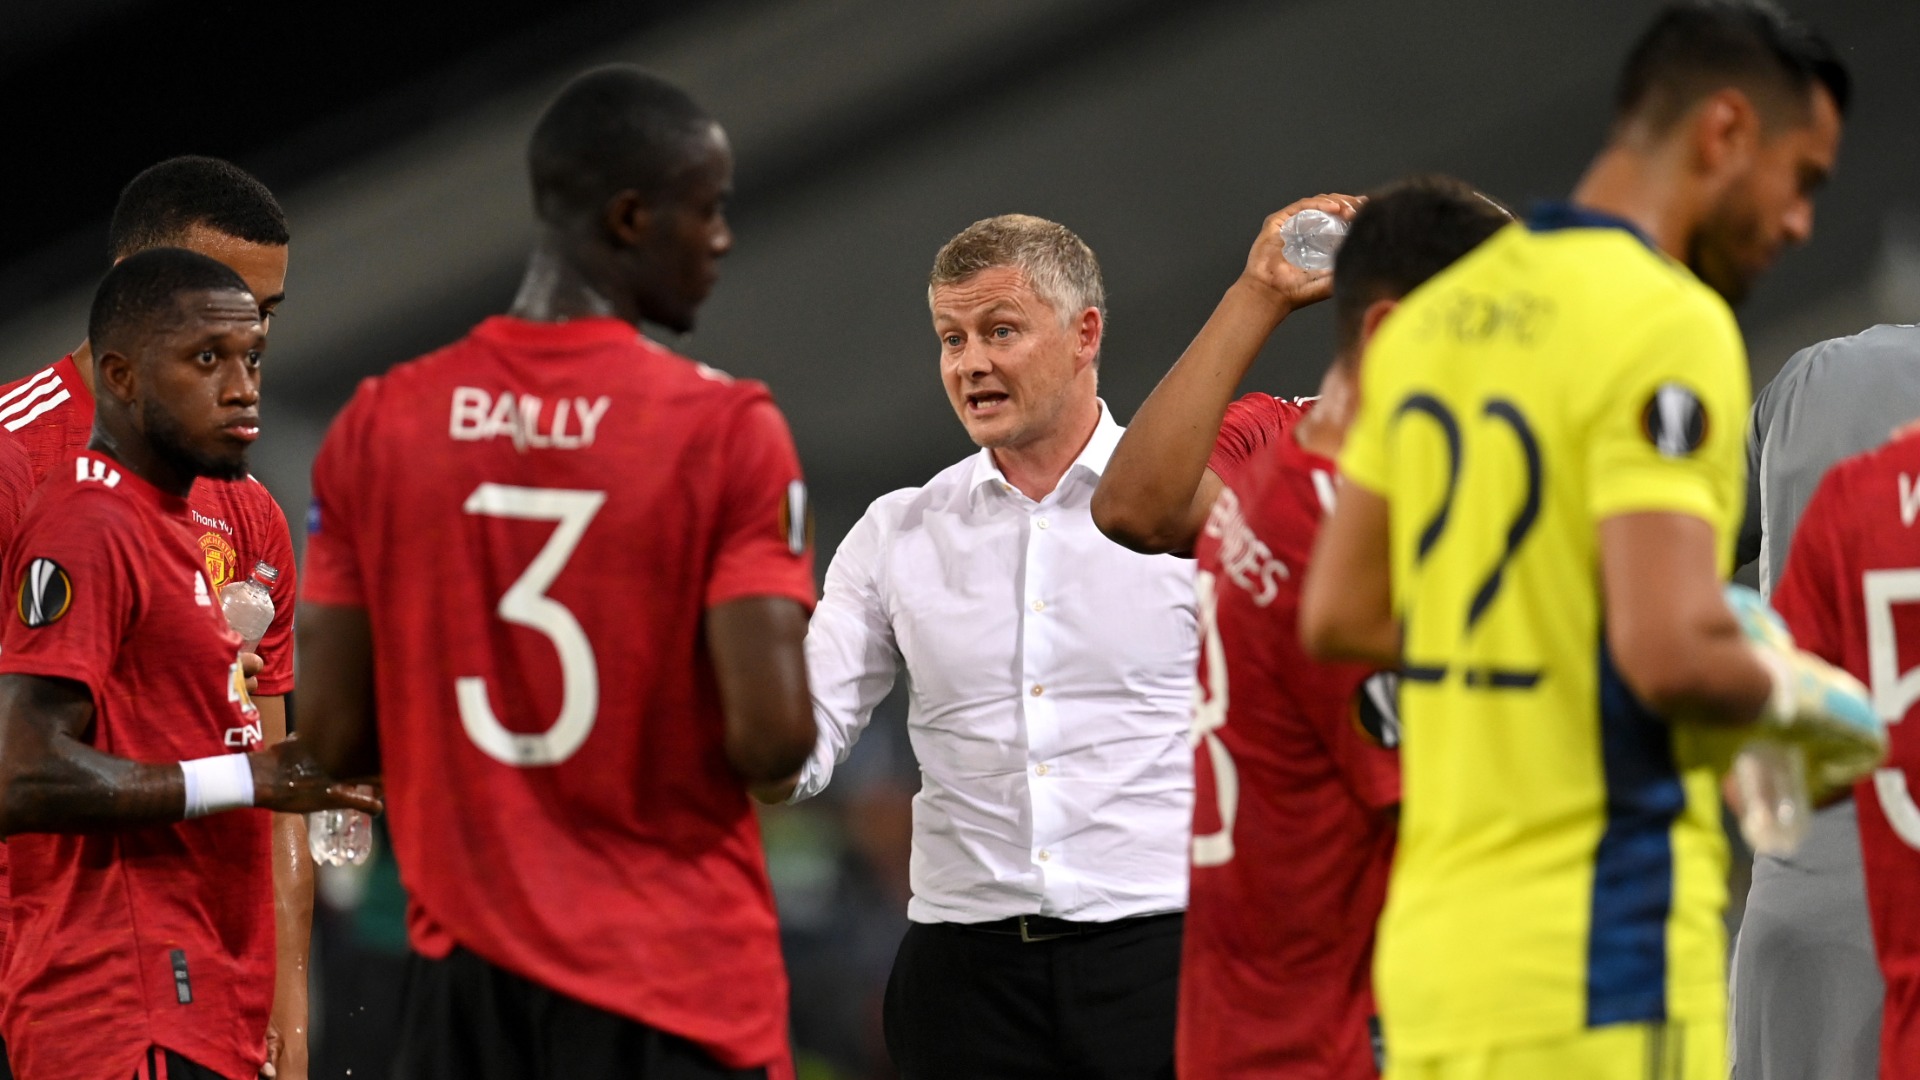 Manchester United were wasteful as they beat Copenhagen on Monday, prompting Ole Gunnar Solskjaer to highlight the need for improvement.